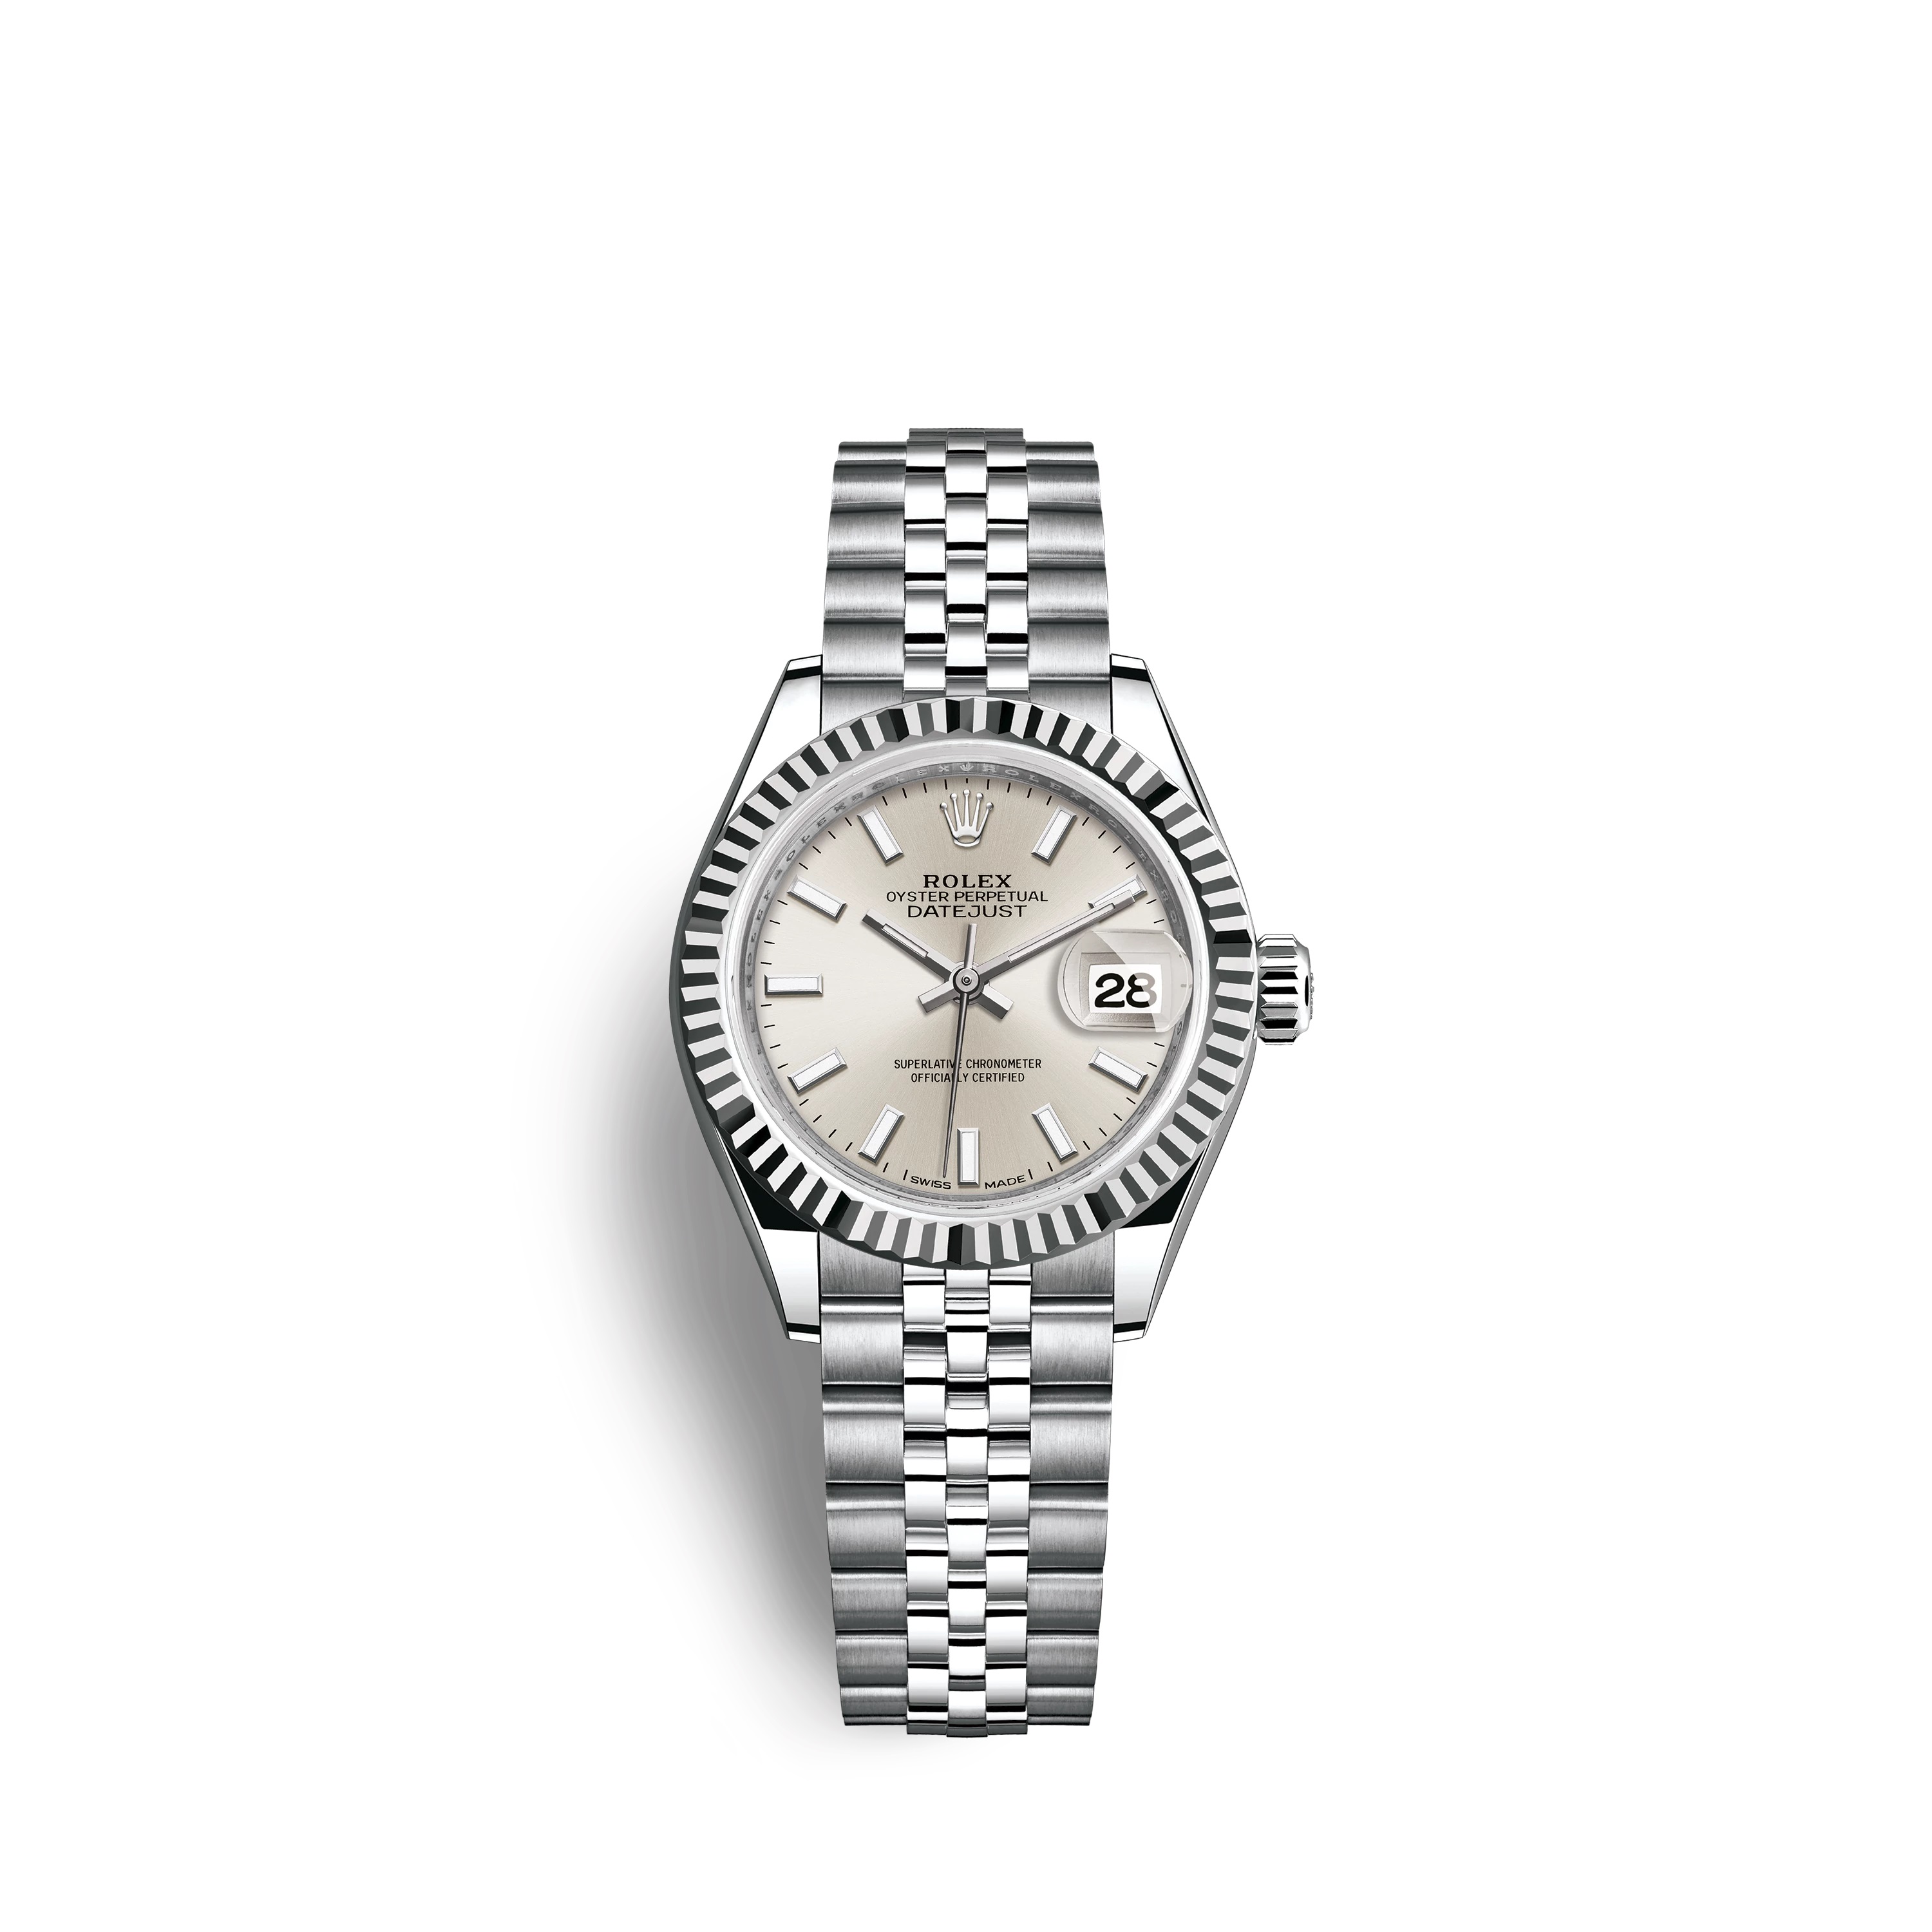 Lady-Datejust 28 279174 White Gold & Stainless Steel Watch (Silver)